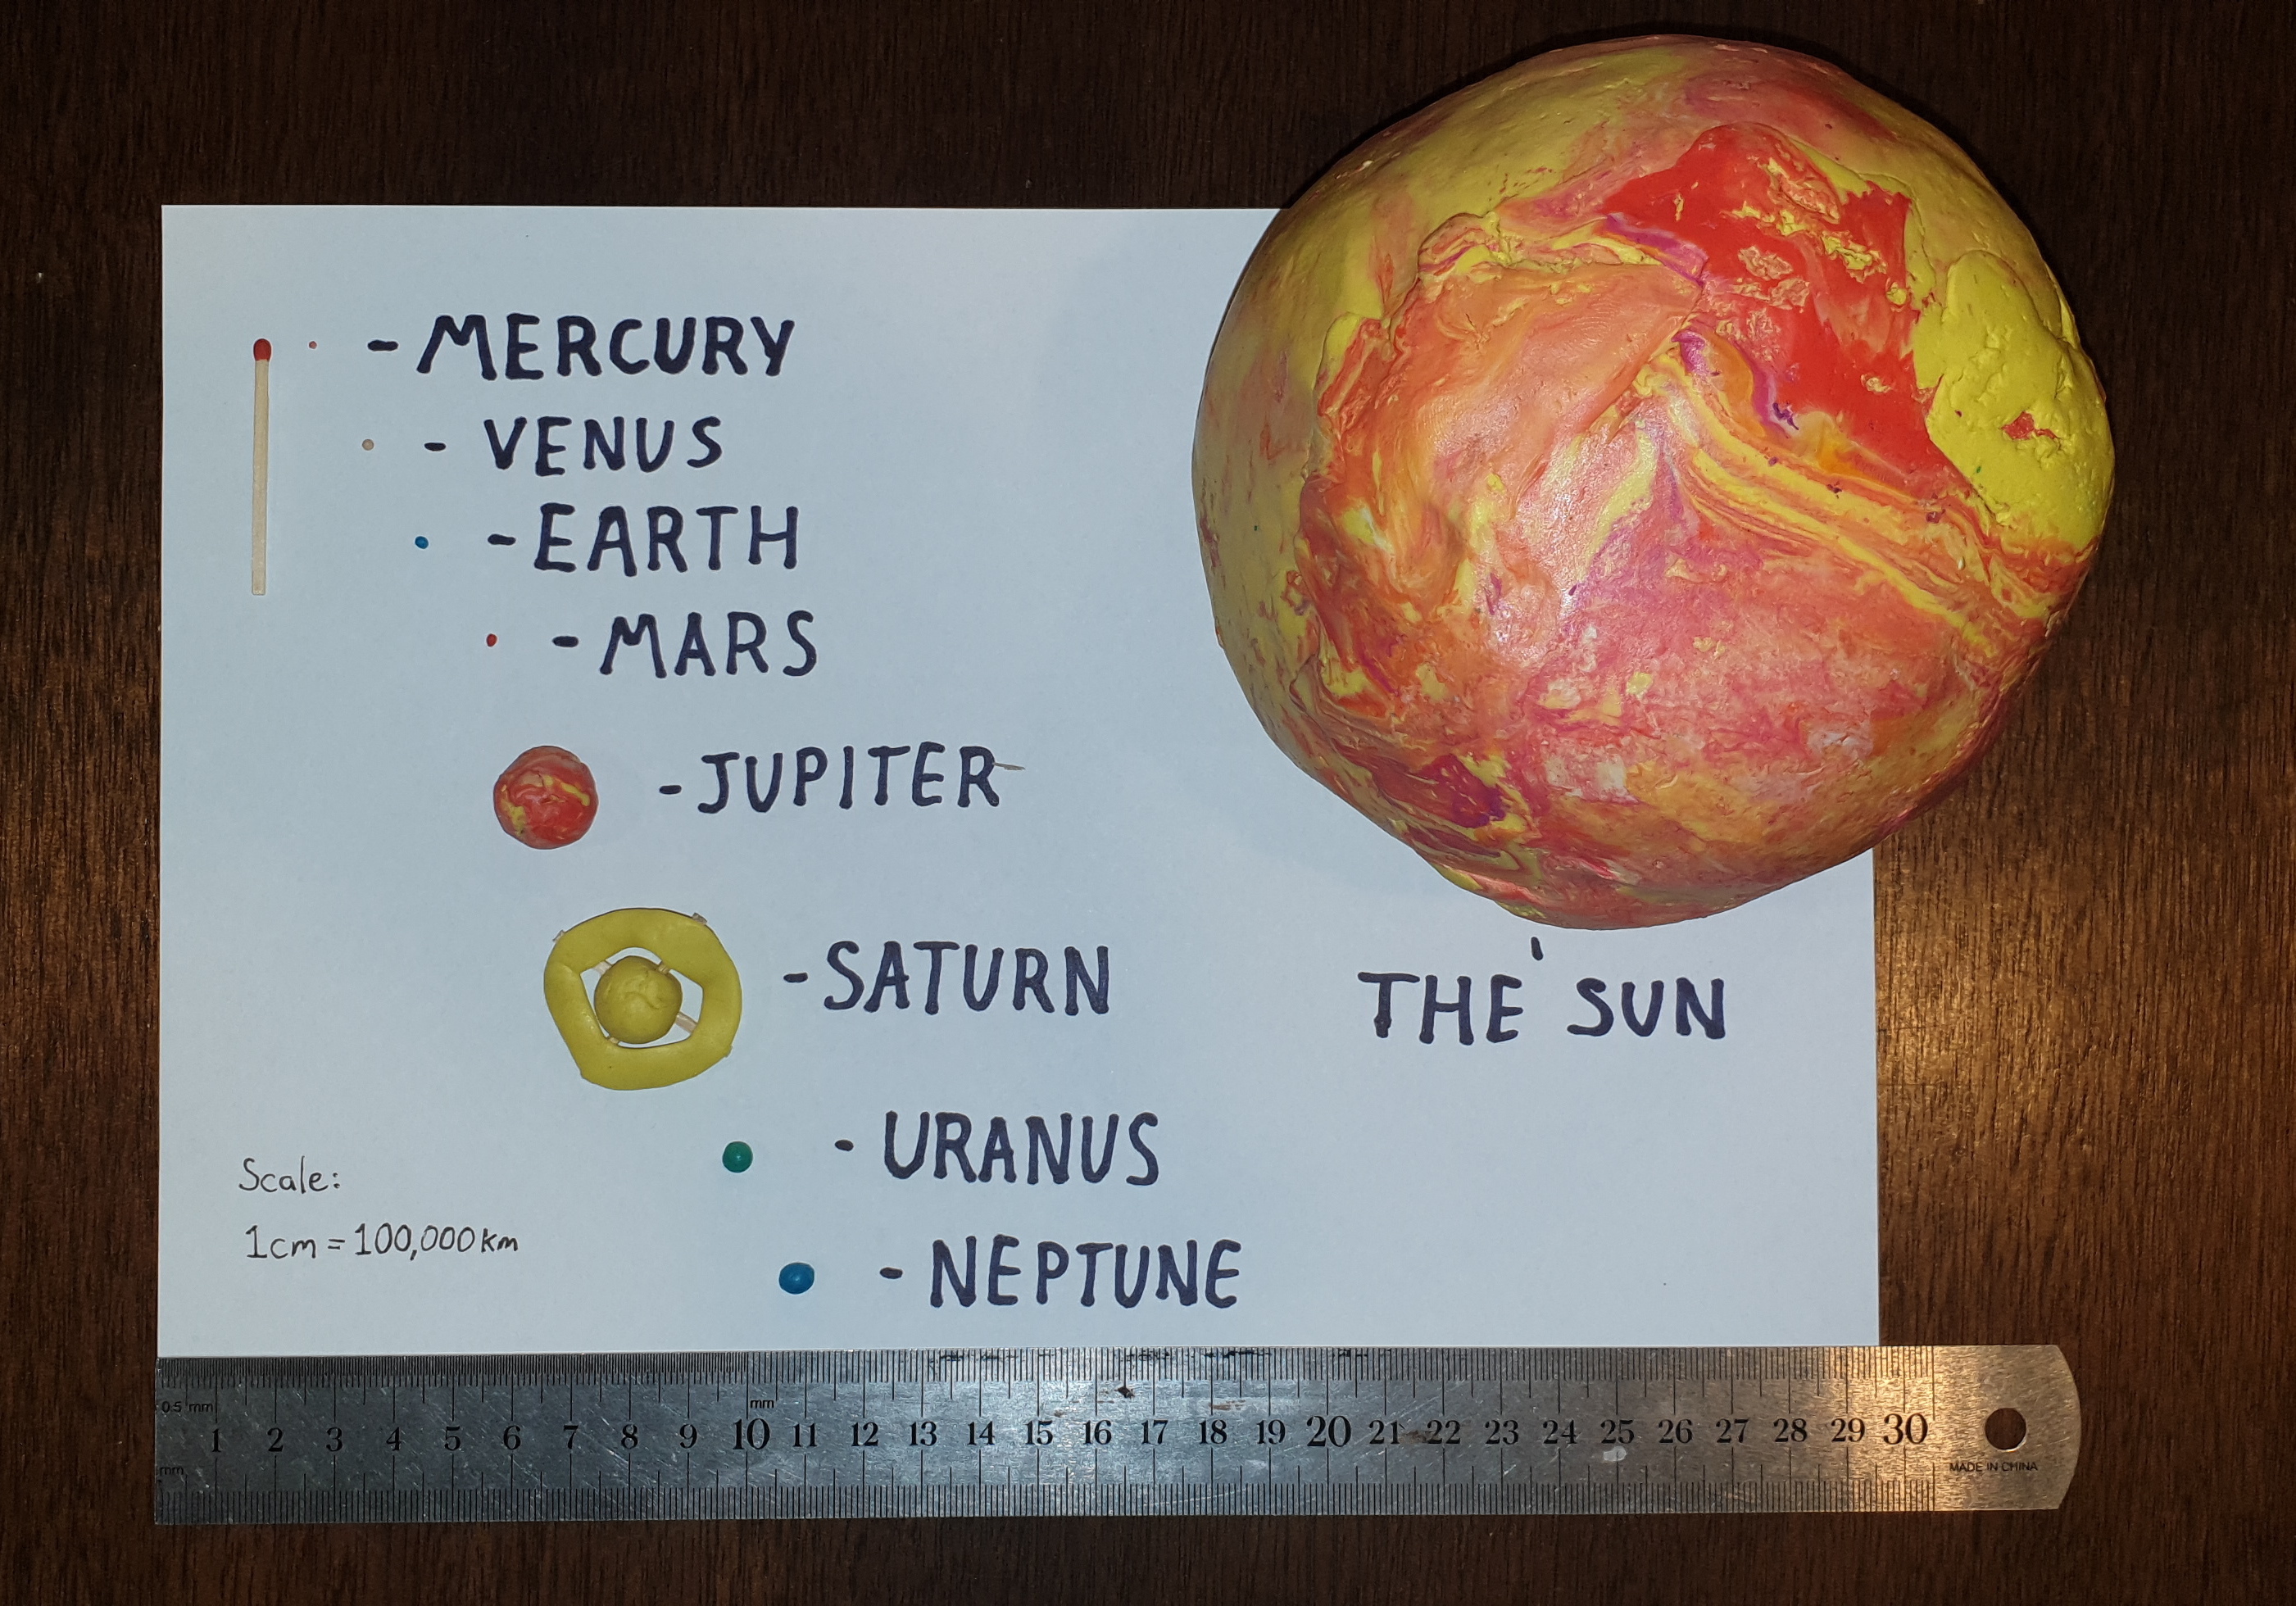 solar system scale model build